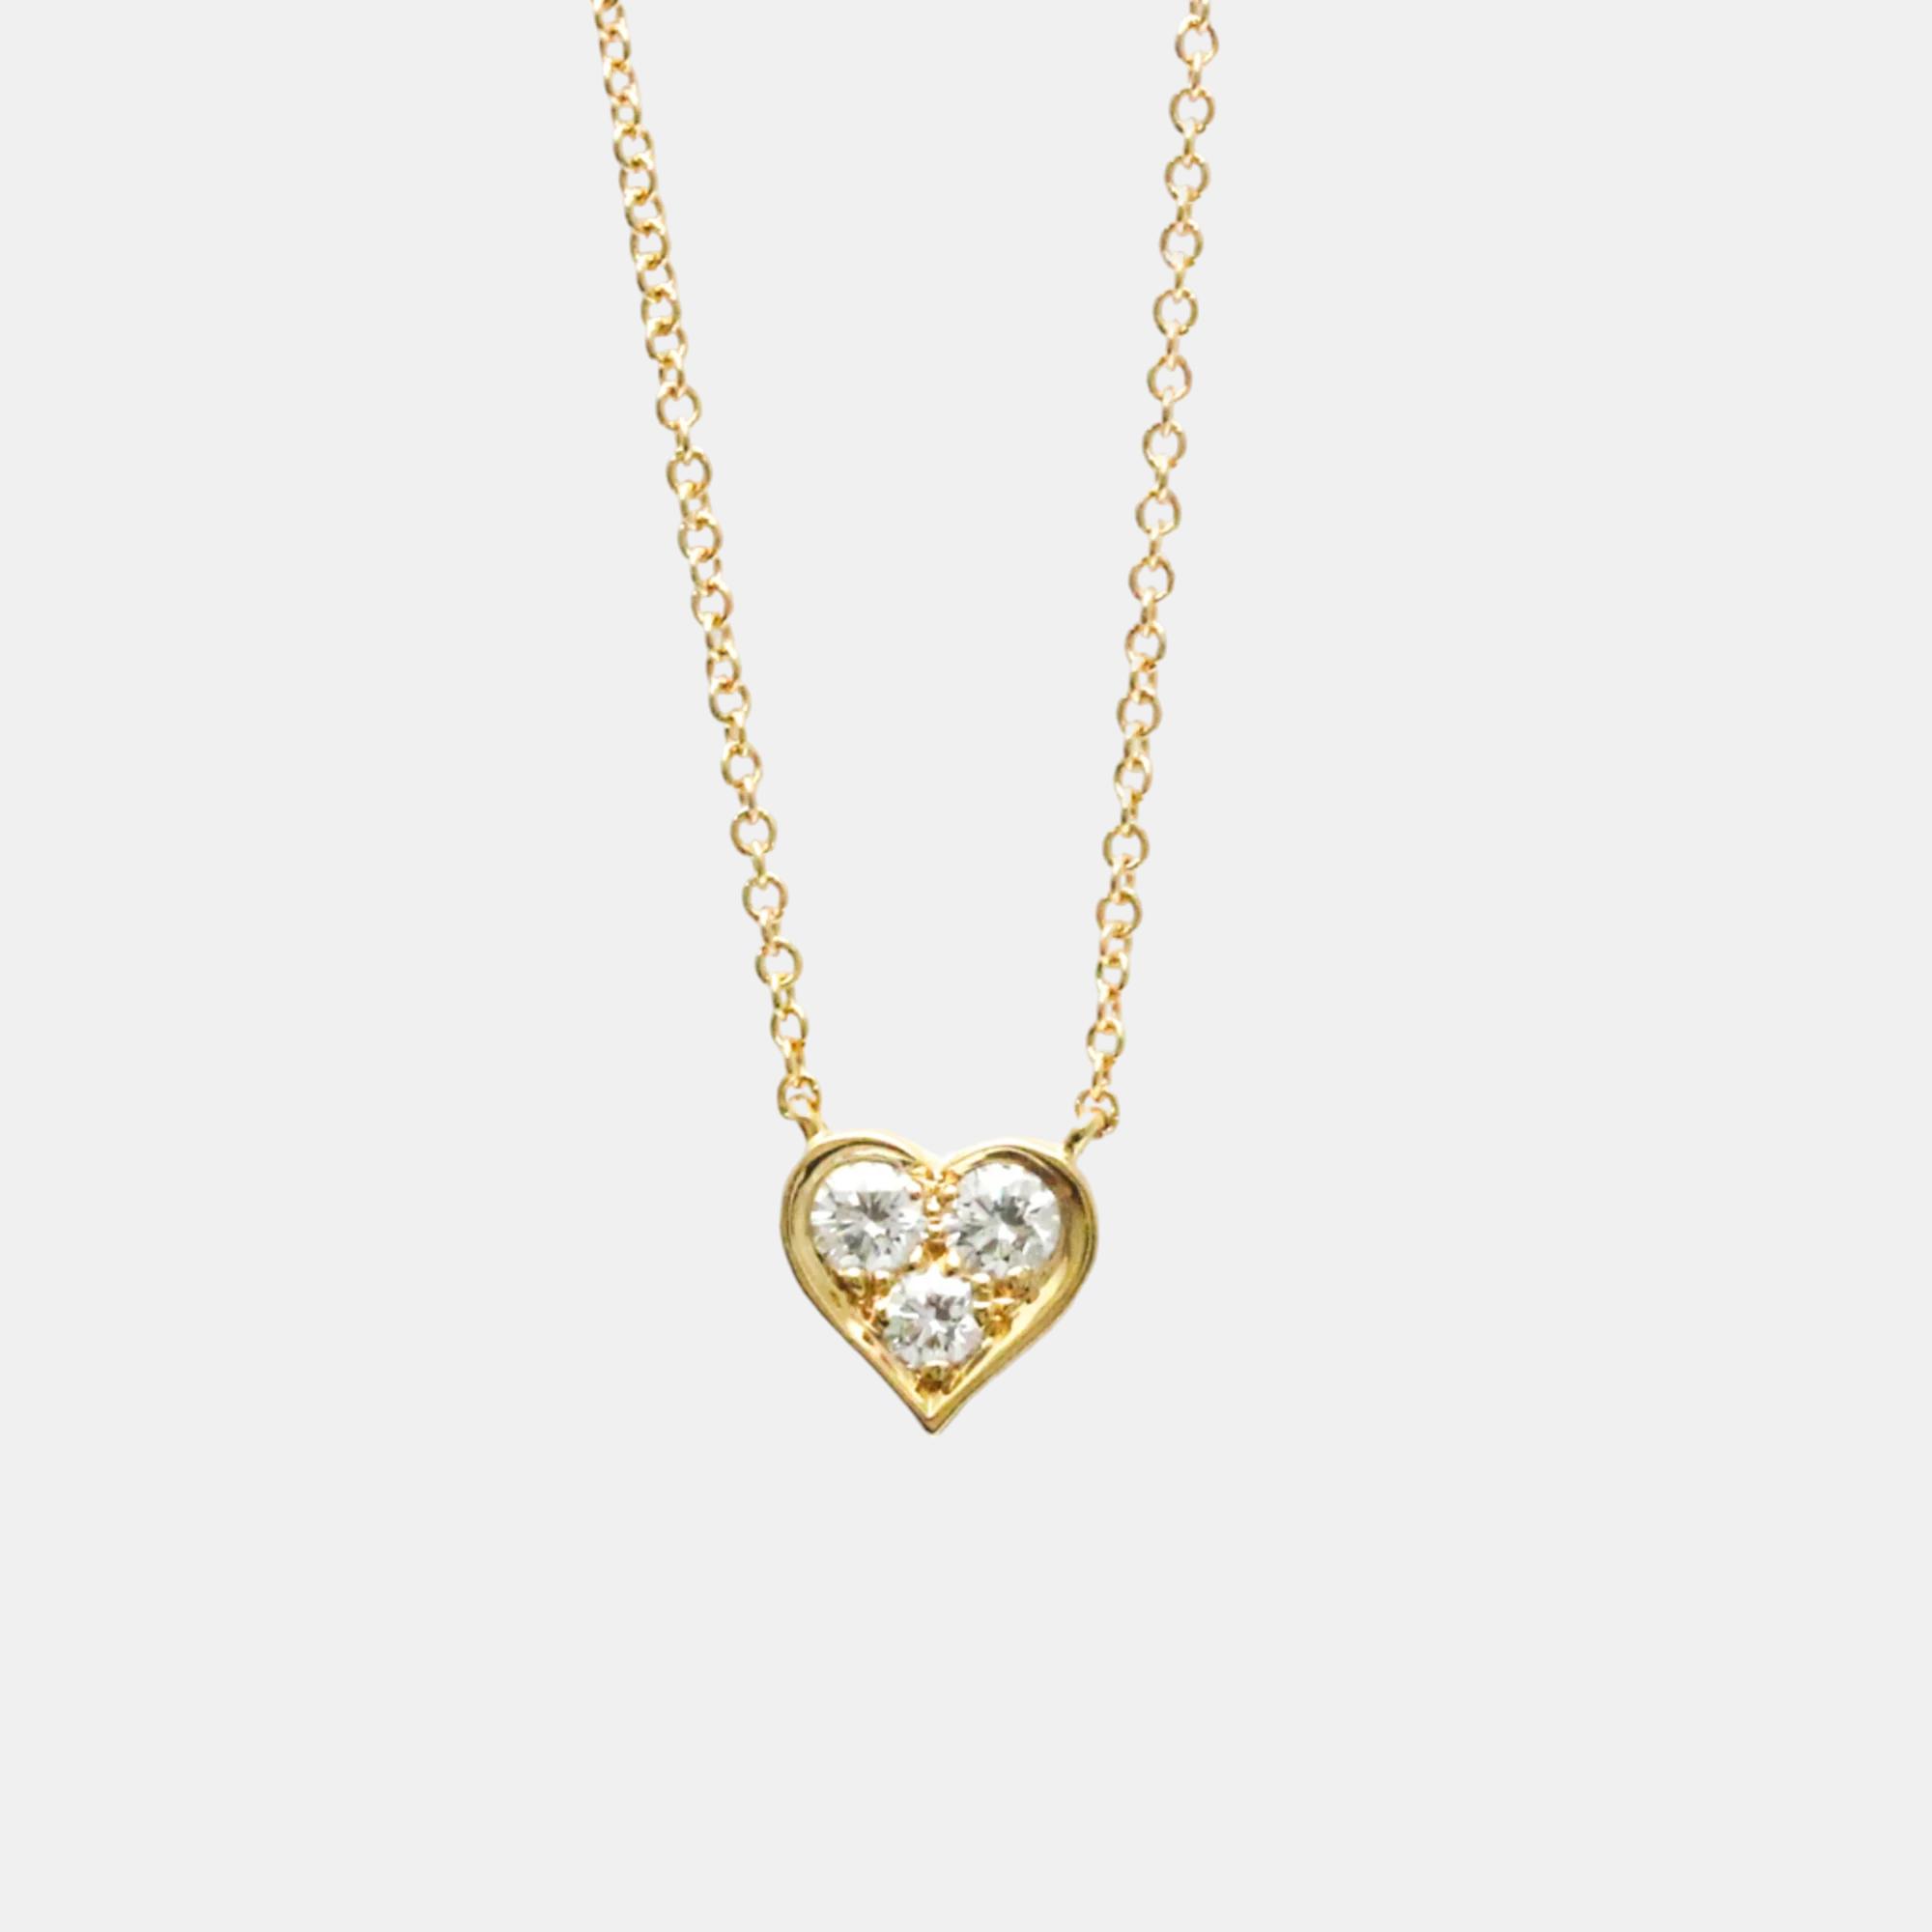 Tiffany & co. 18k rose gold and diamond heart pendant necklace